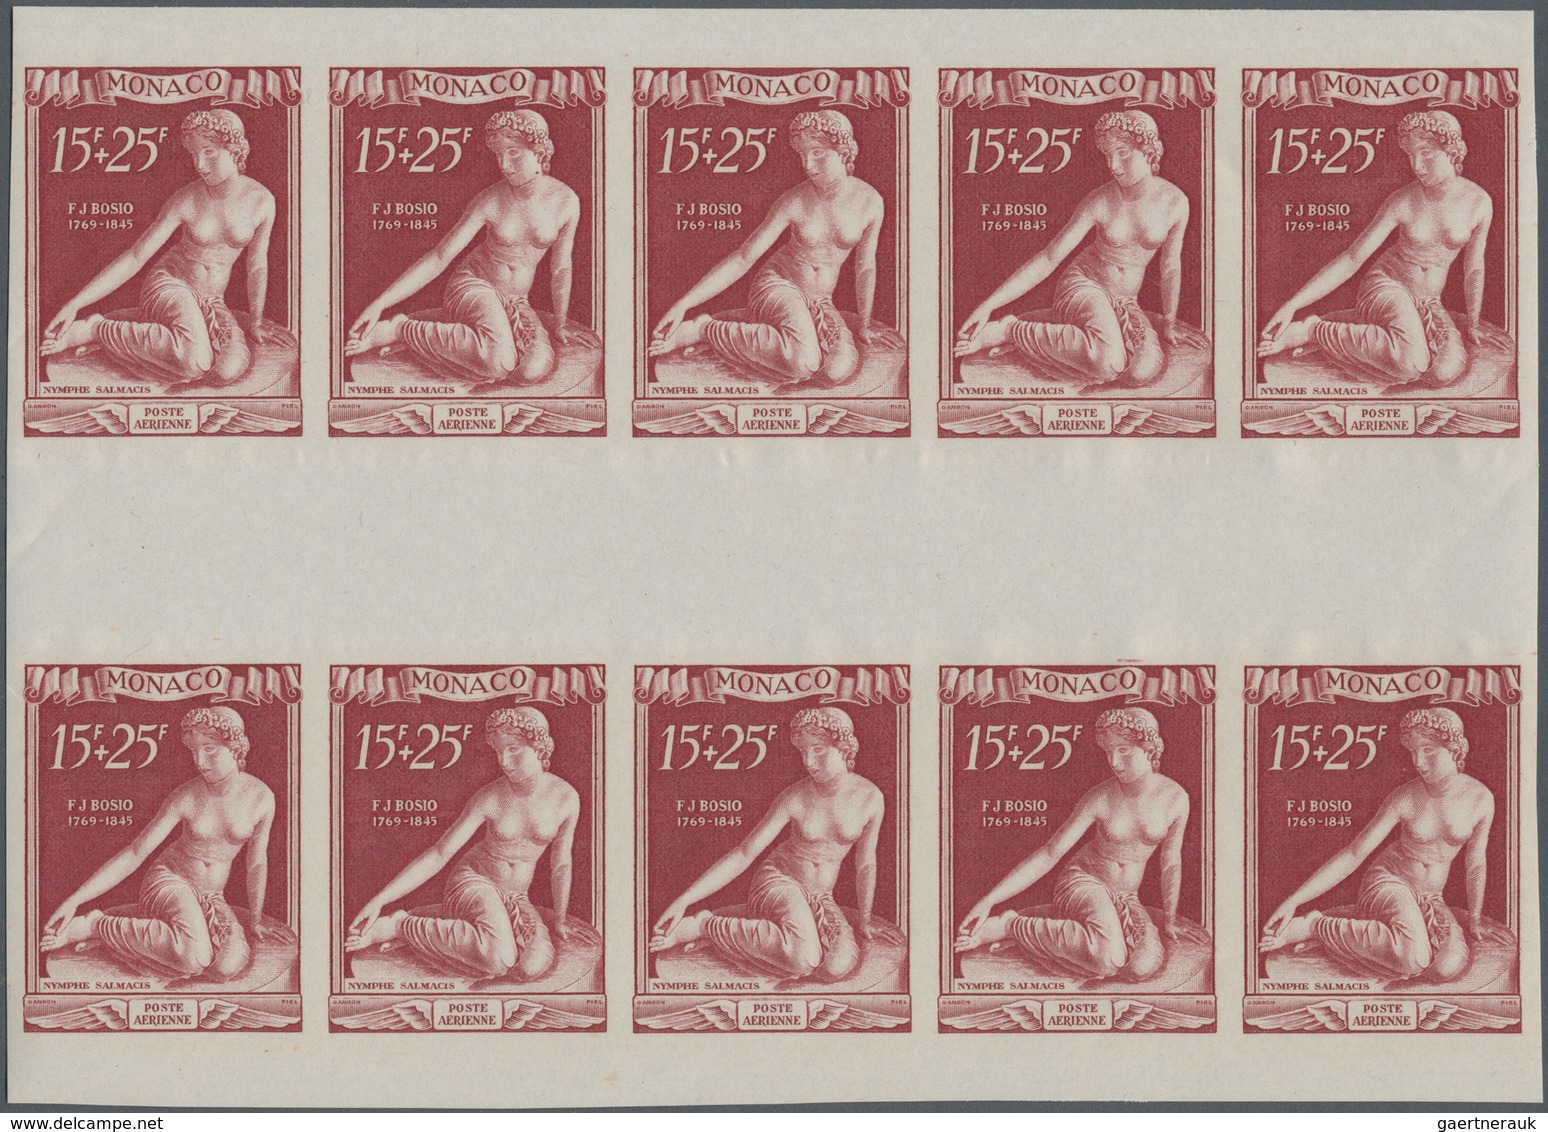 Monaco: 1948, 180th birthday of Francois-Joseph Bosio (sculptures) complete airmail set of four in I